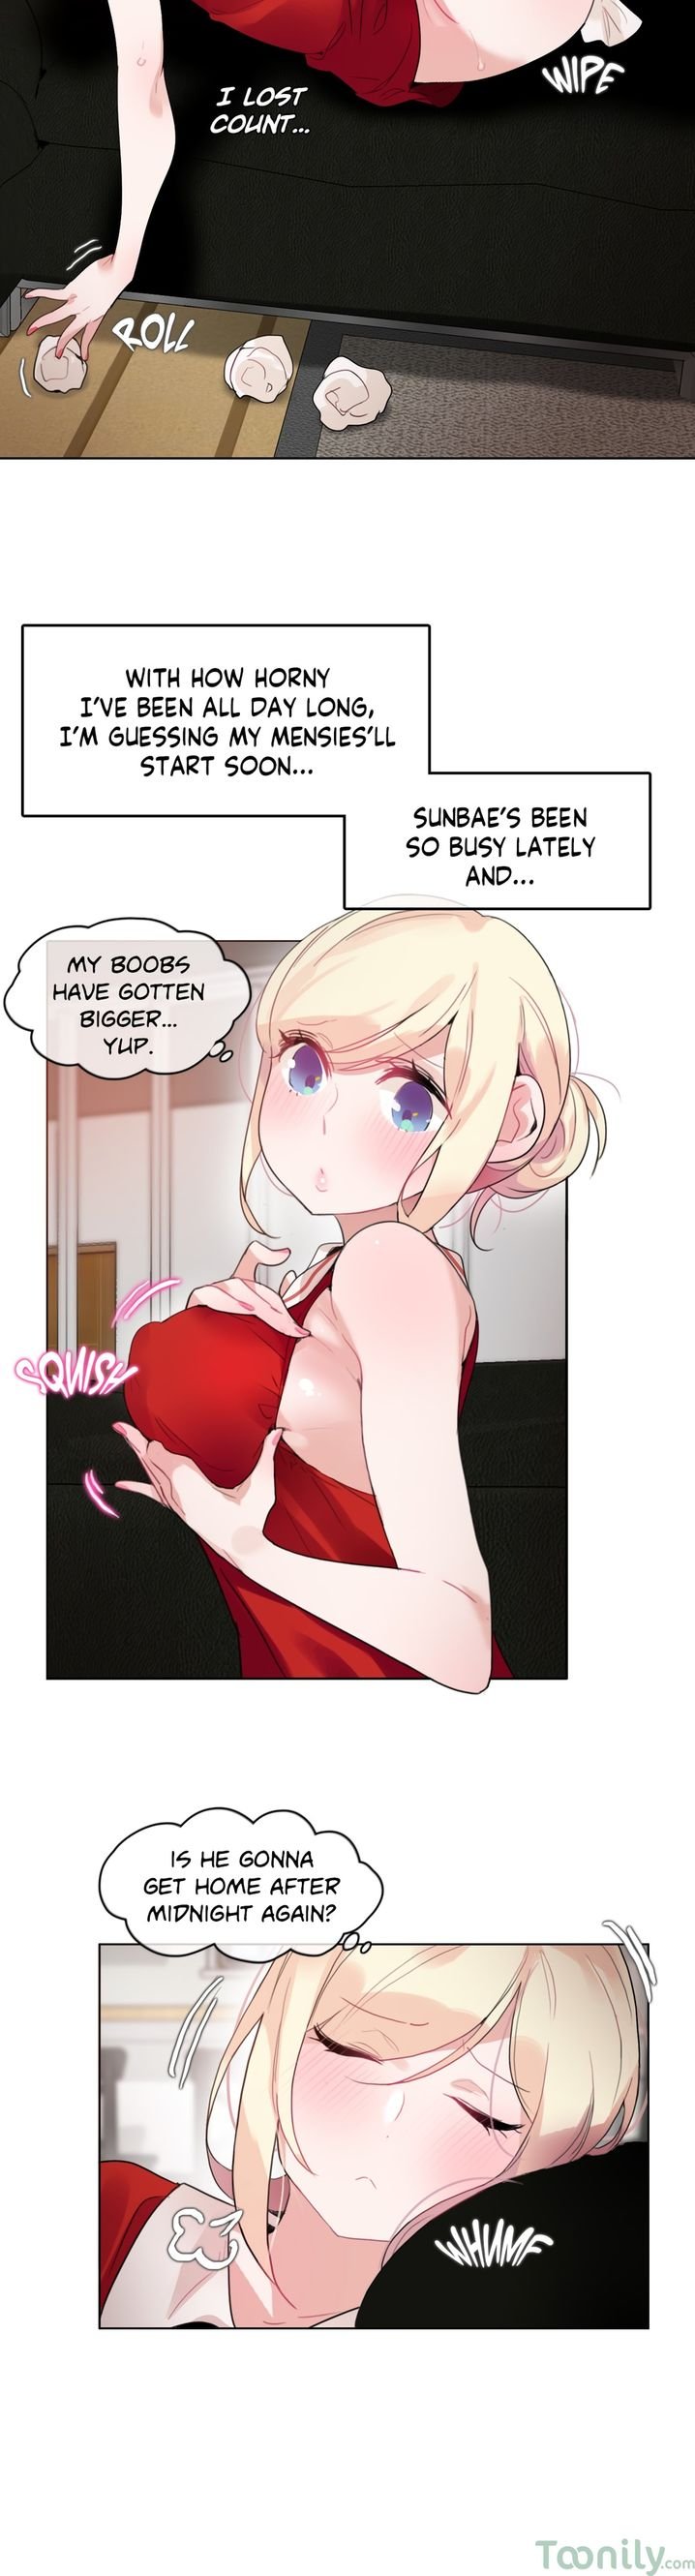 a-perverts-daily-life-chap-37-3